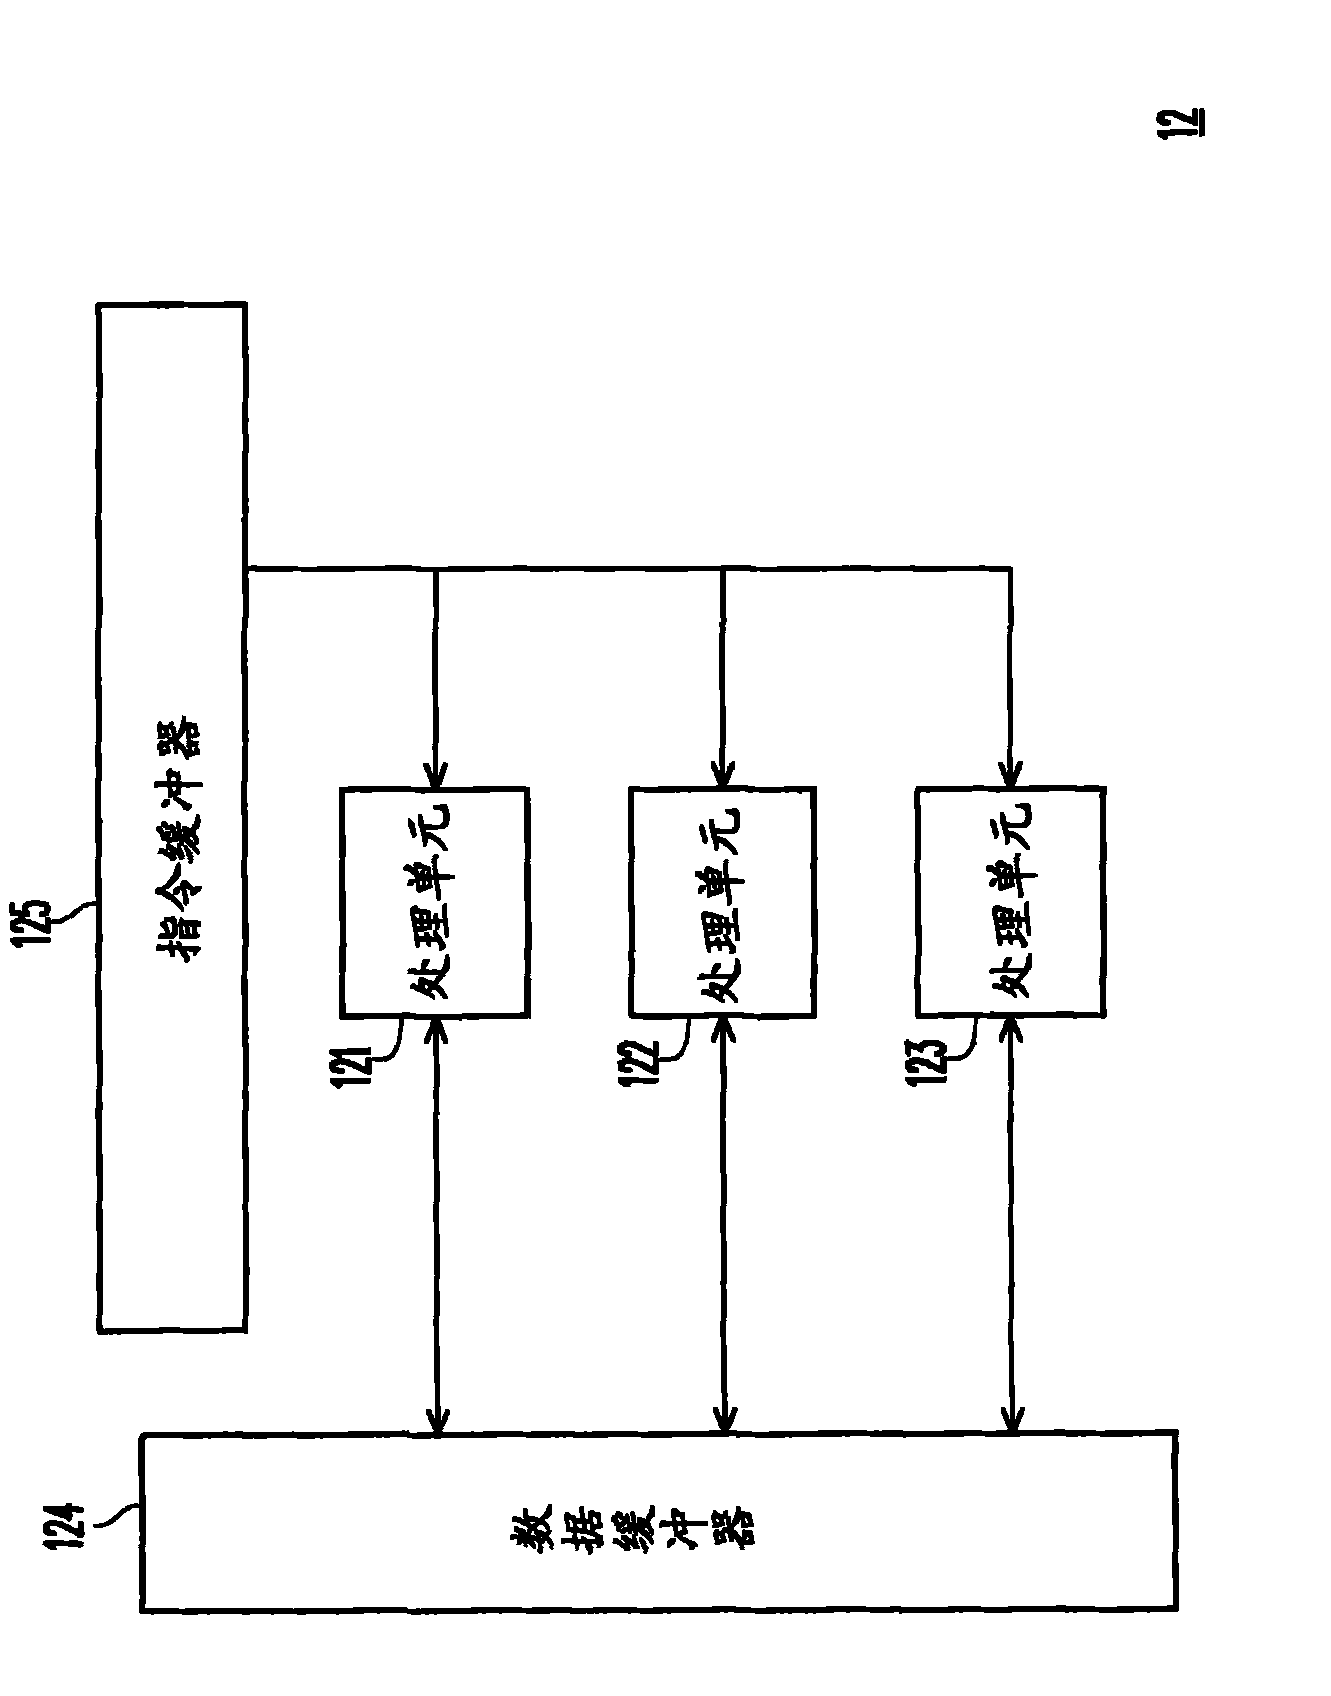 Reconfigurable processing device and system